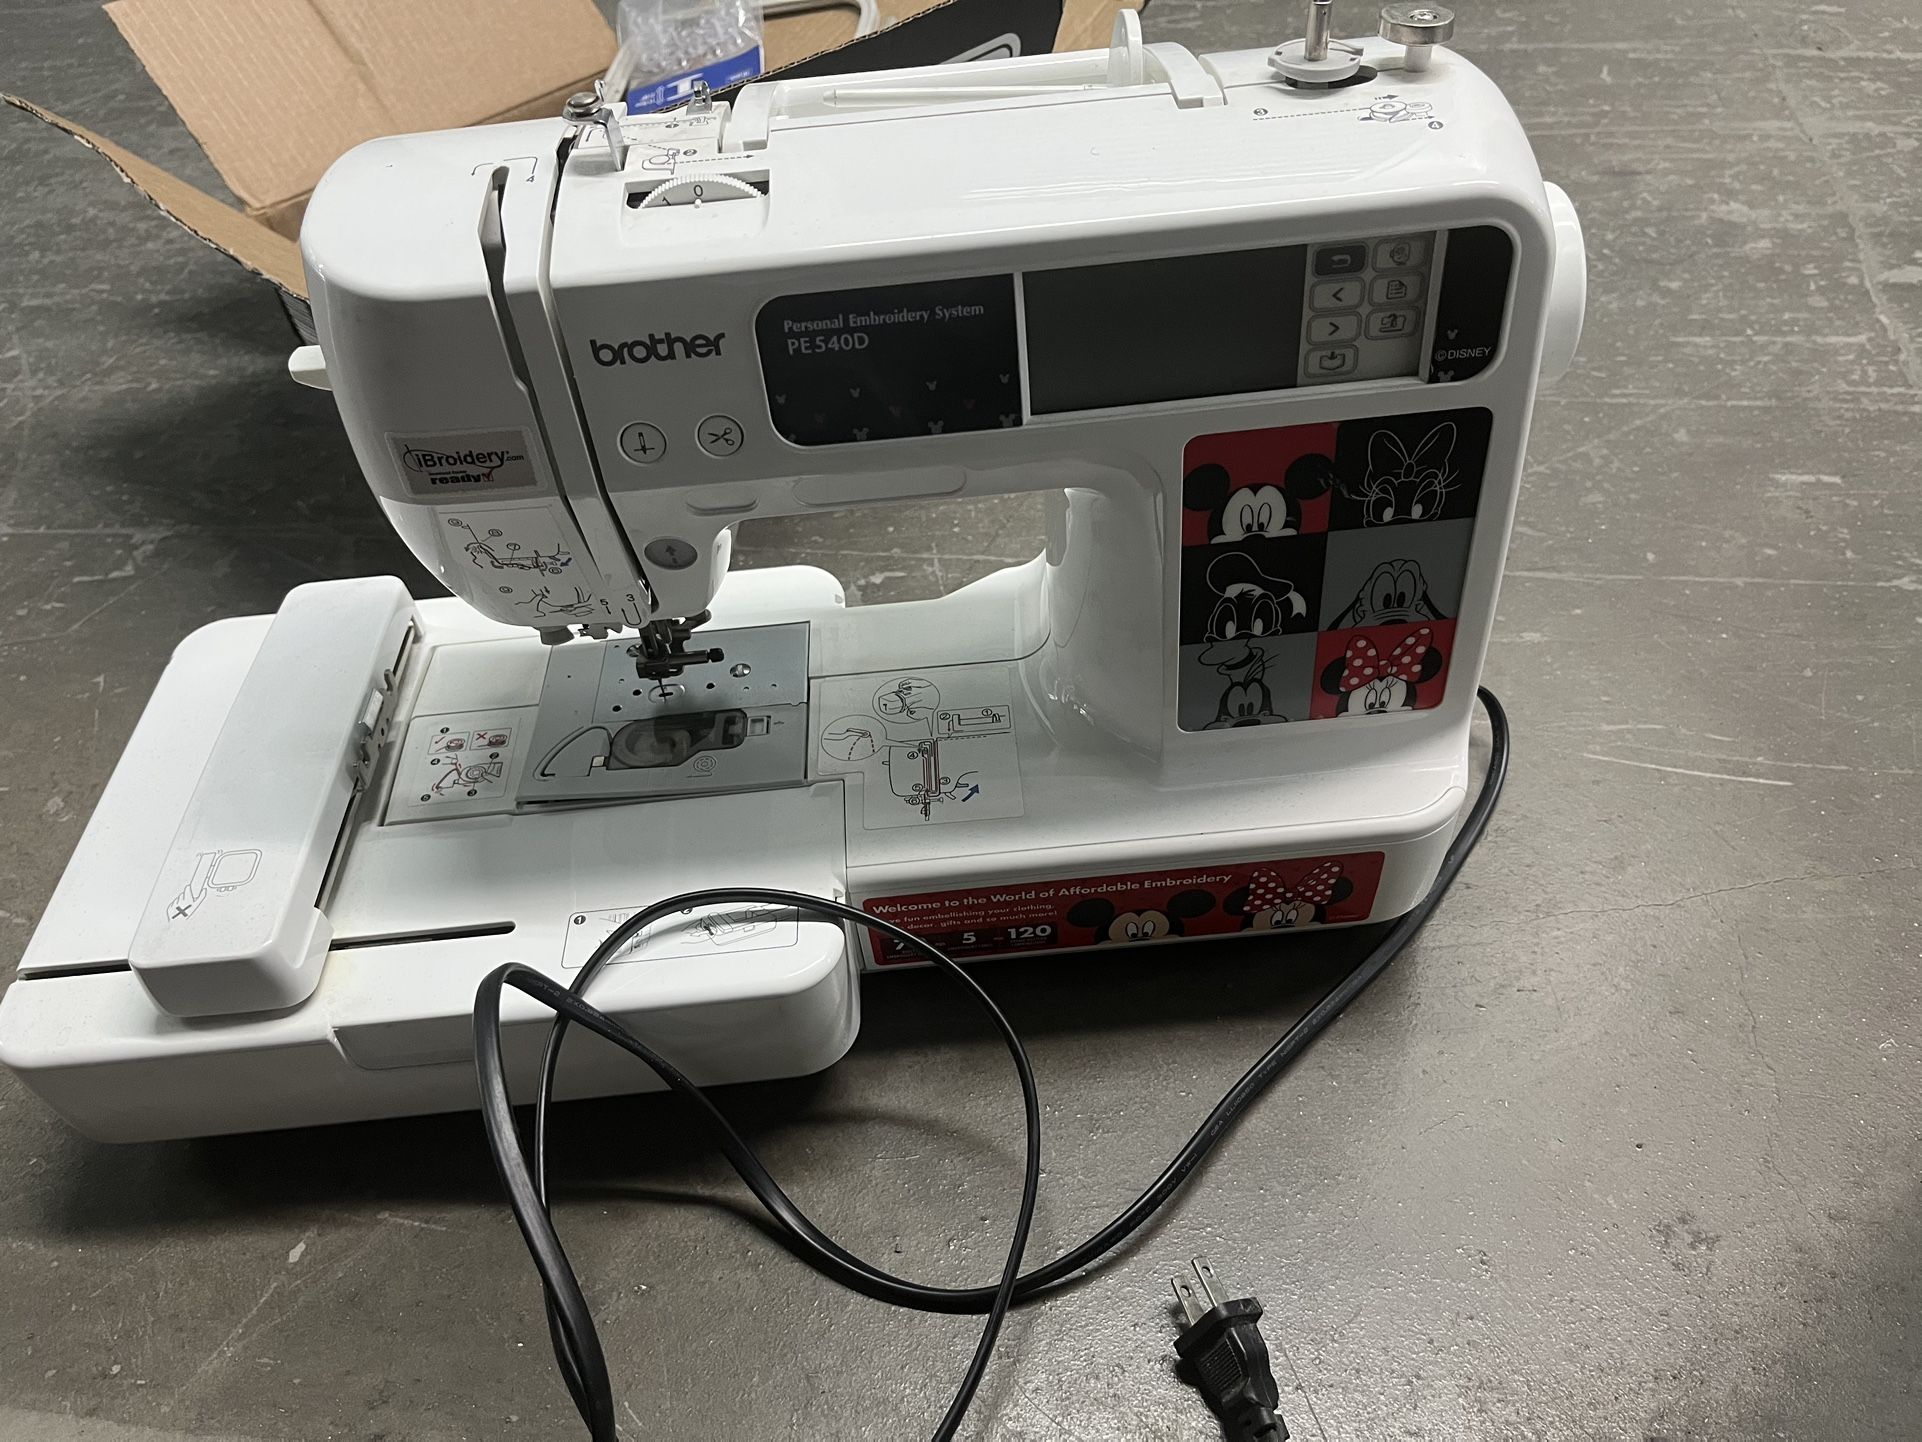 Brother PE 540D Disney Embroidery Machine